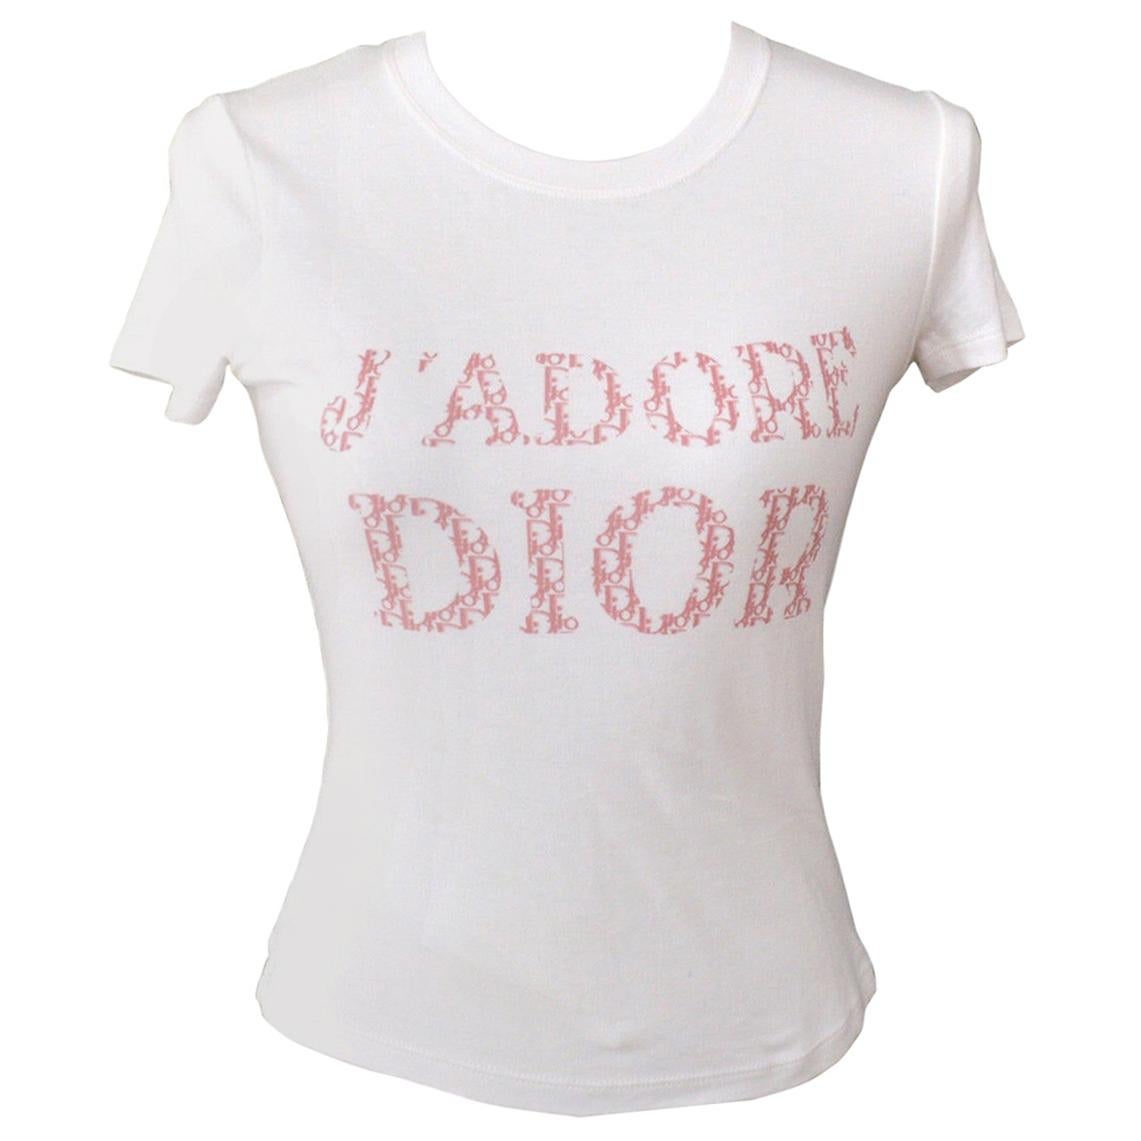 Christian Dior Pink White 'J'Adore Dior' Short Sleeve Fitted T-Shirt Shirt